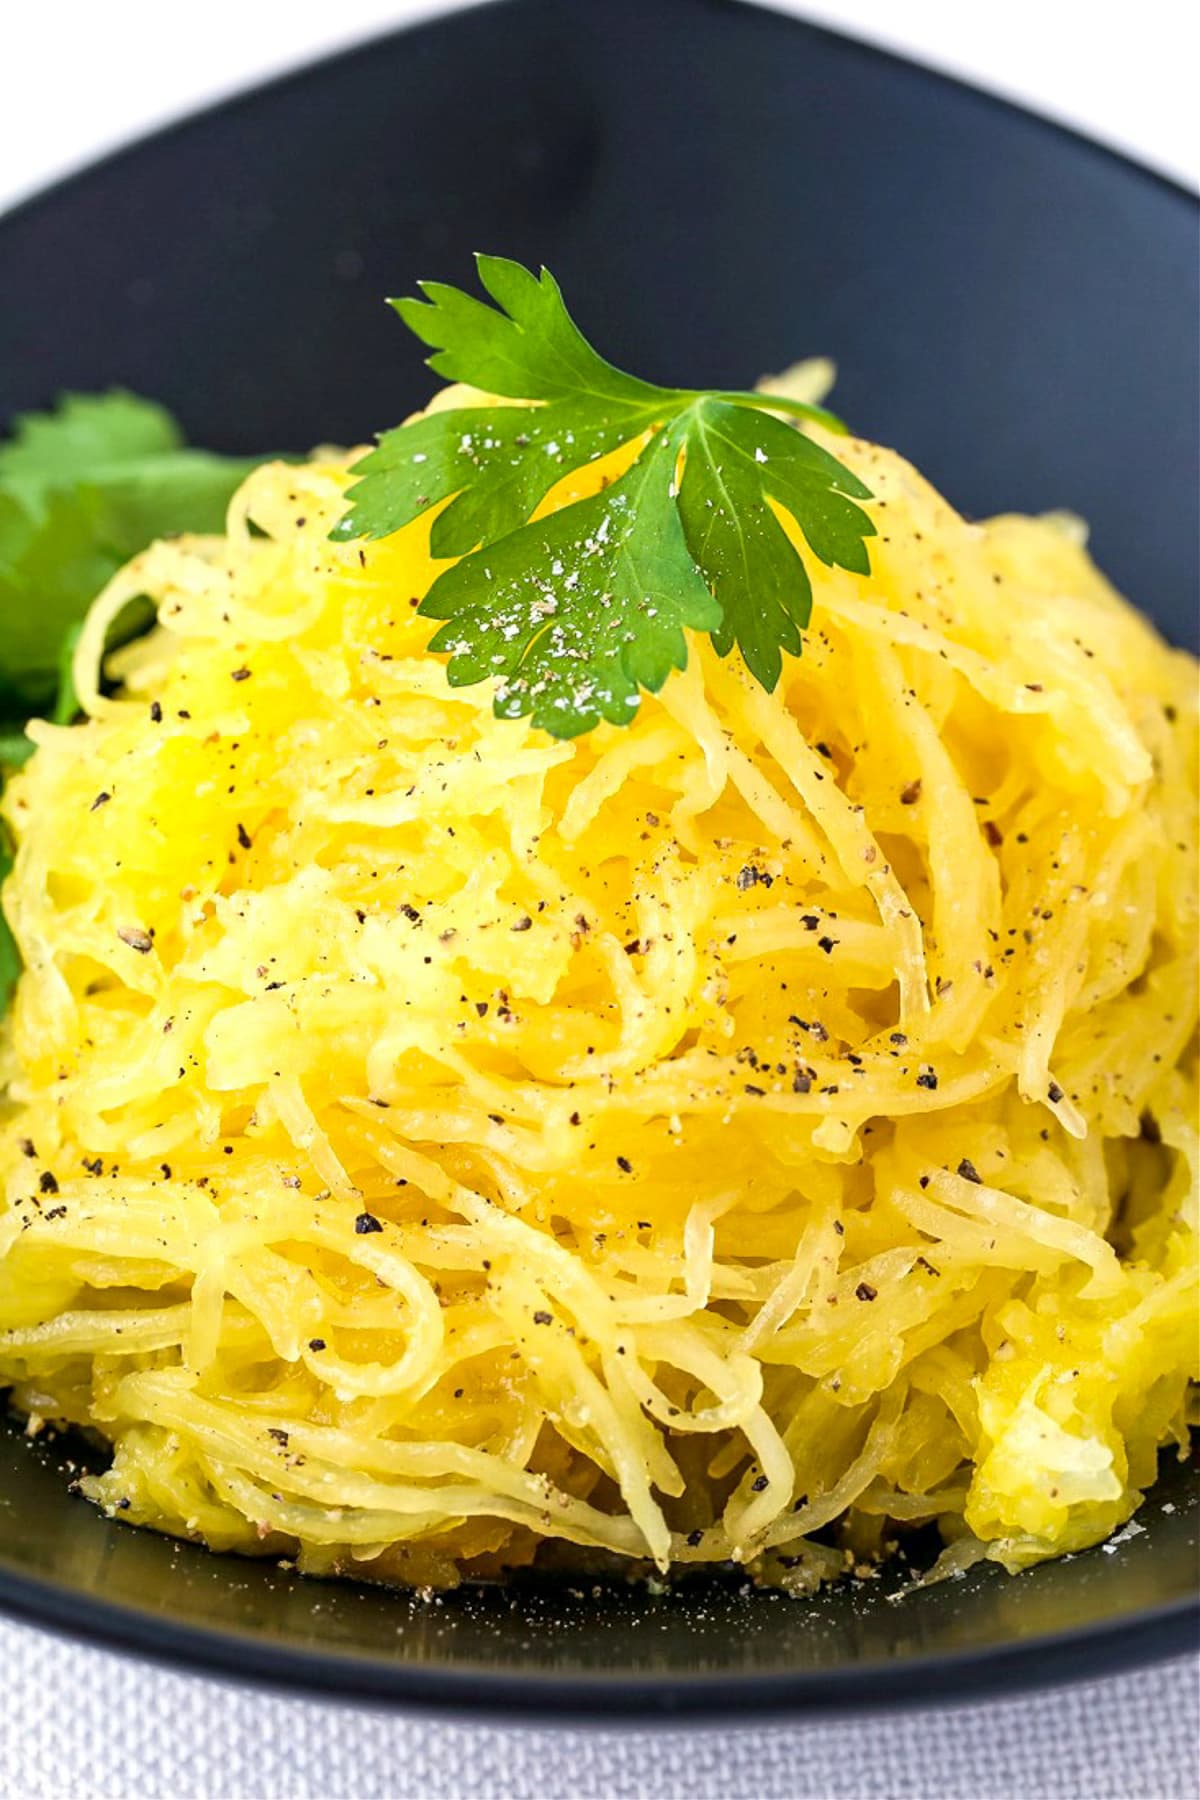 mound of spaghetti squash on black plate with parsley